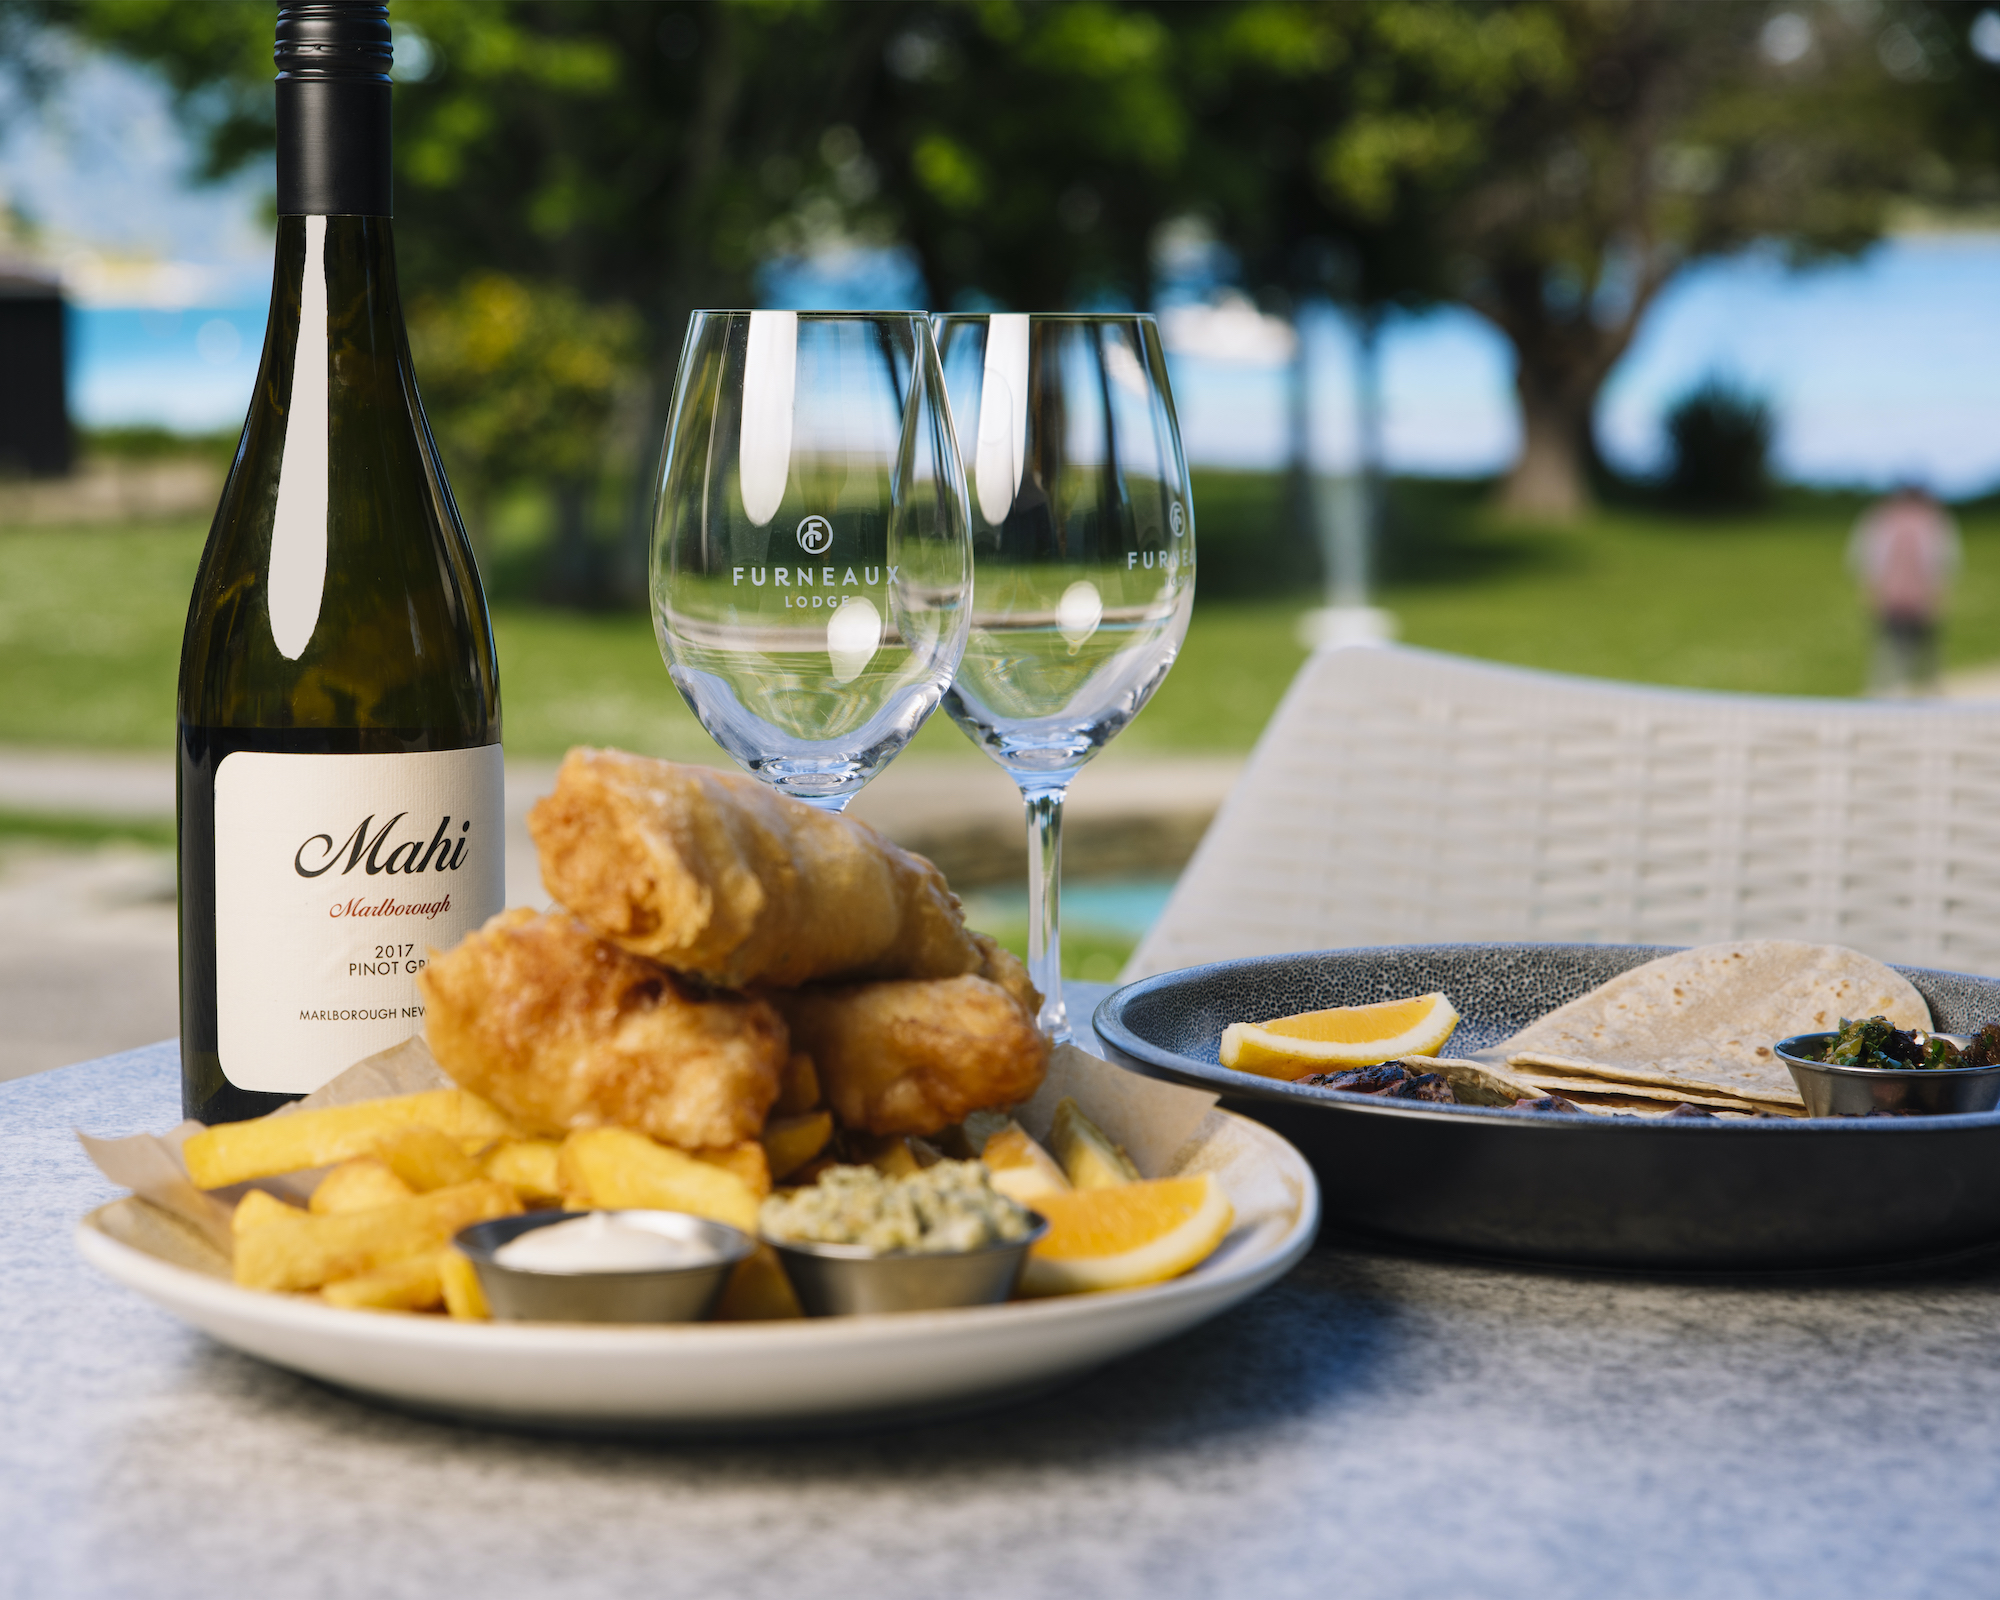 Furneaux Lodge's famous fish and chips with bottle of wine glasses and view of the water.